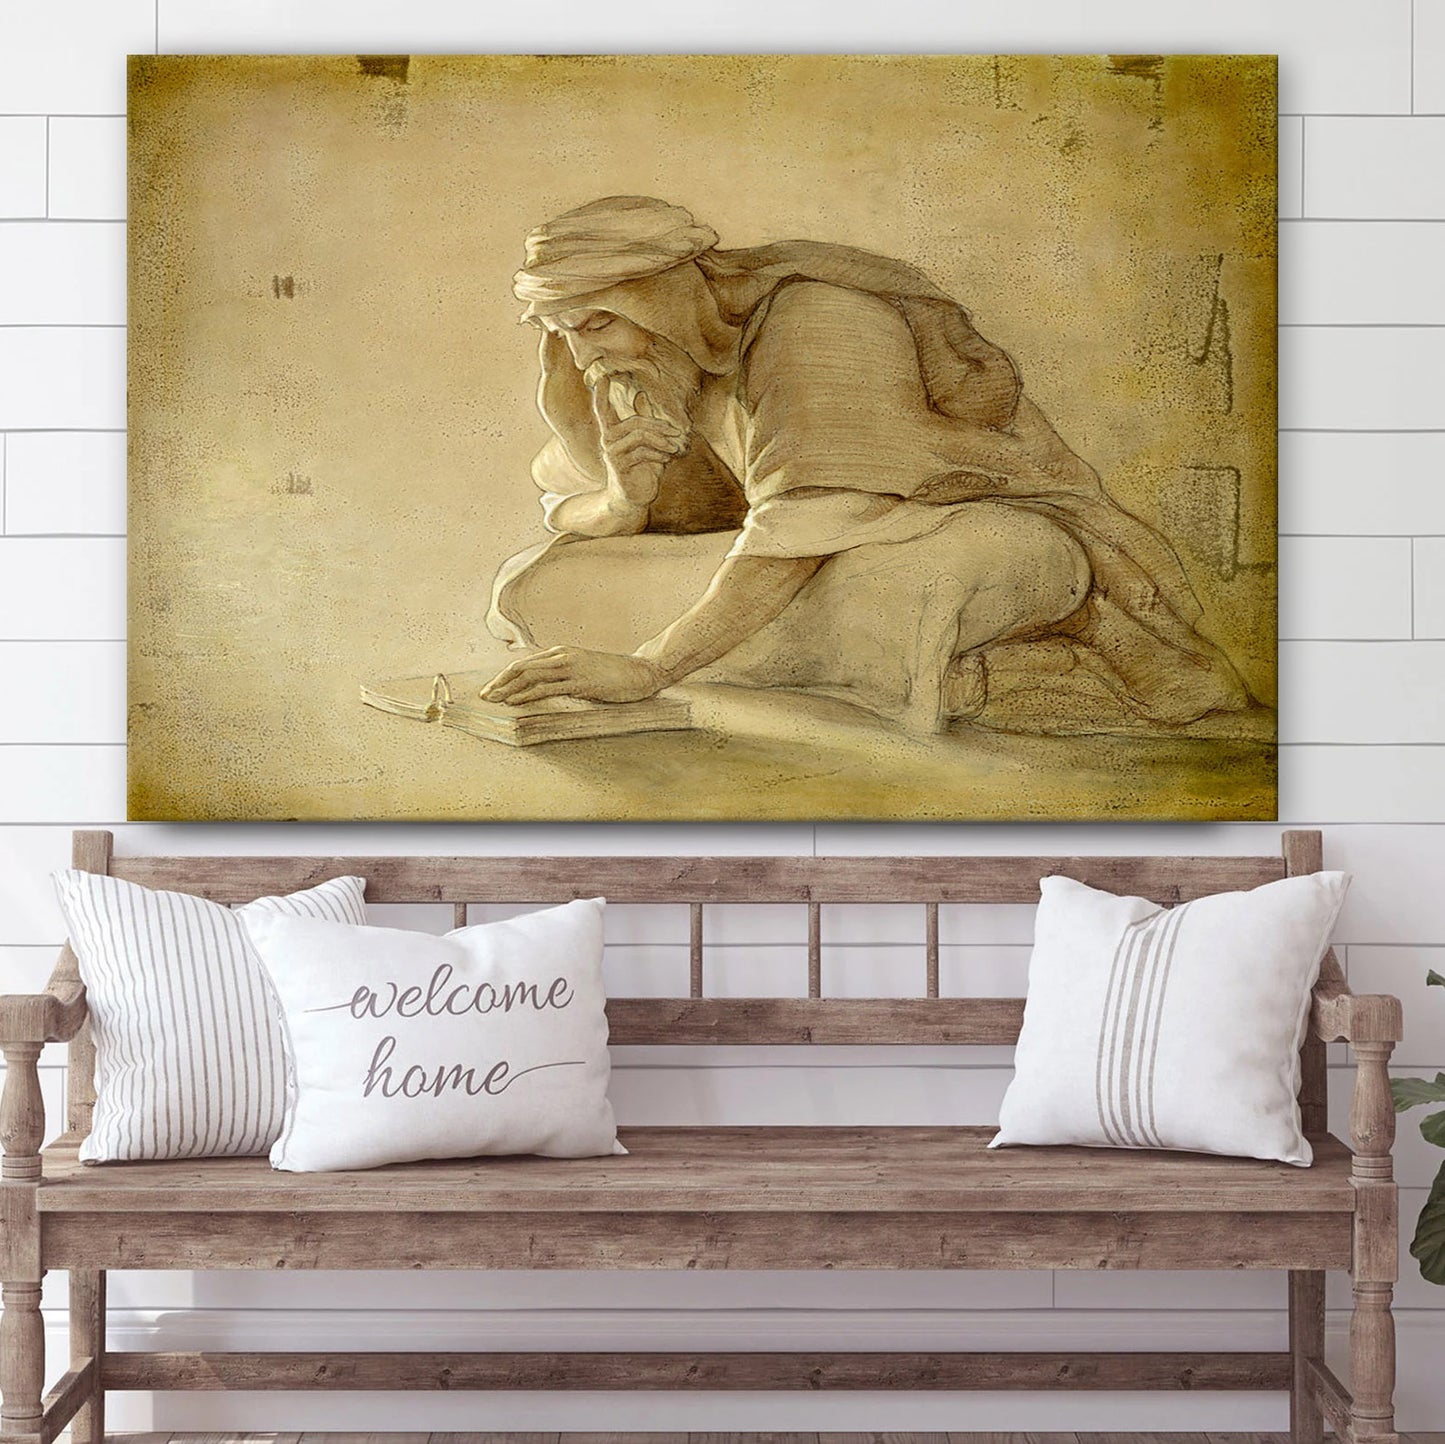 Lehi With Plates  Canvas Pictures - Jesus Christ Canvas - Christian Wall Art